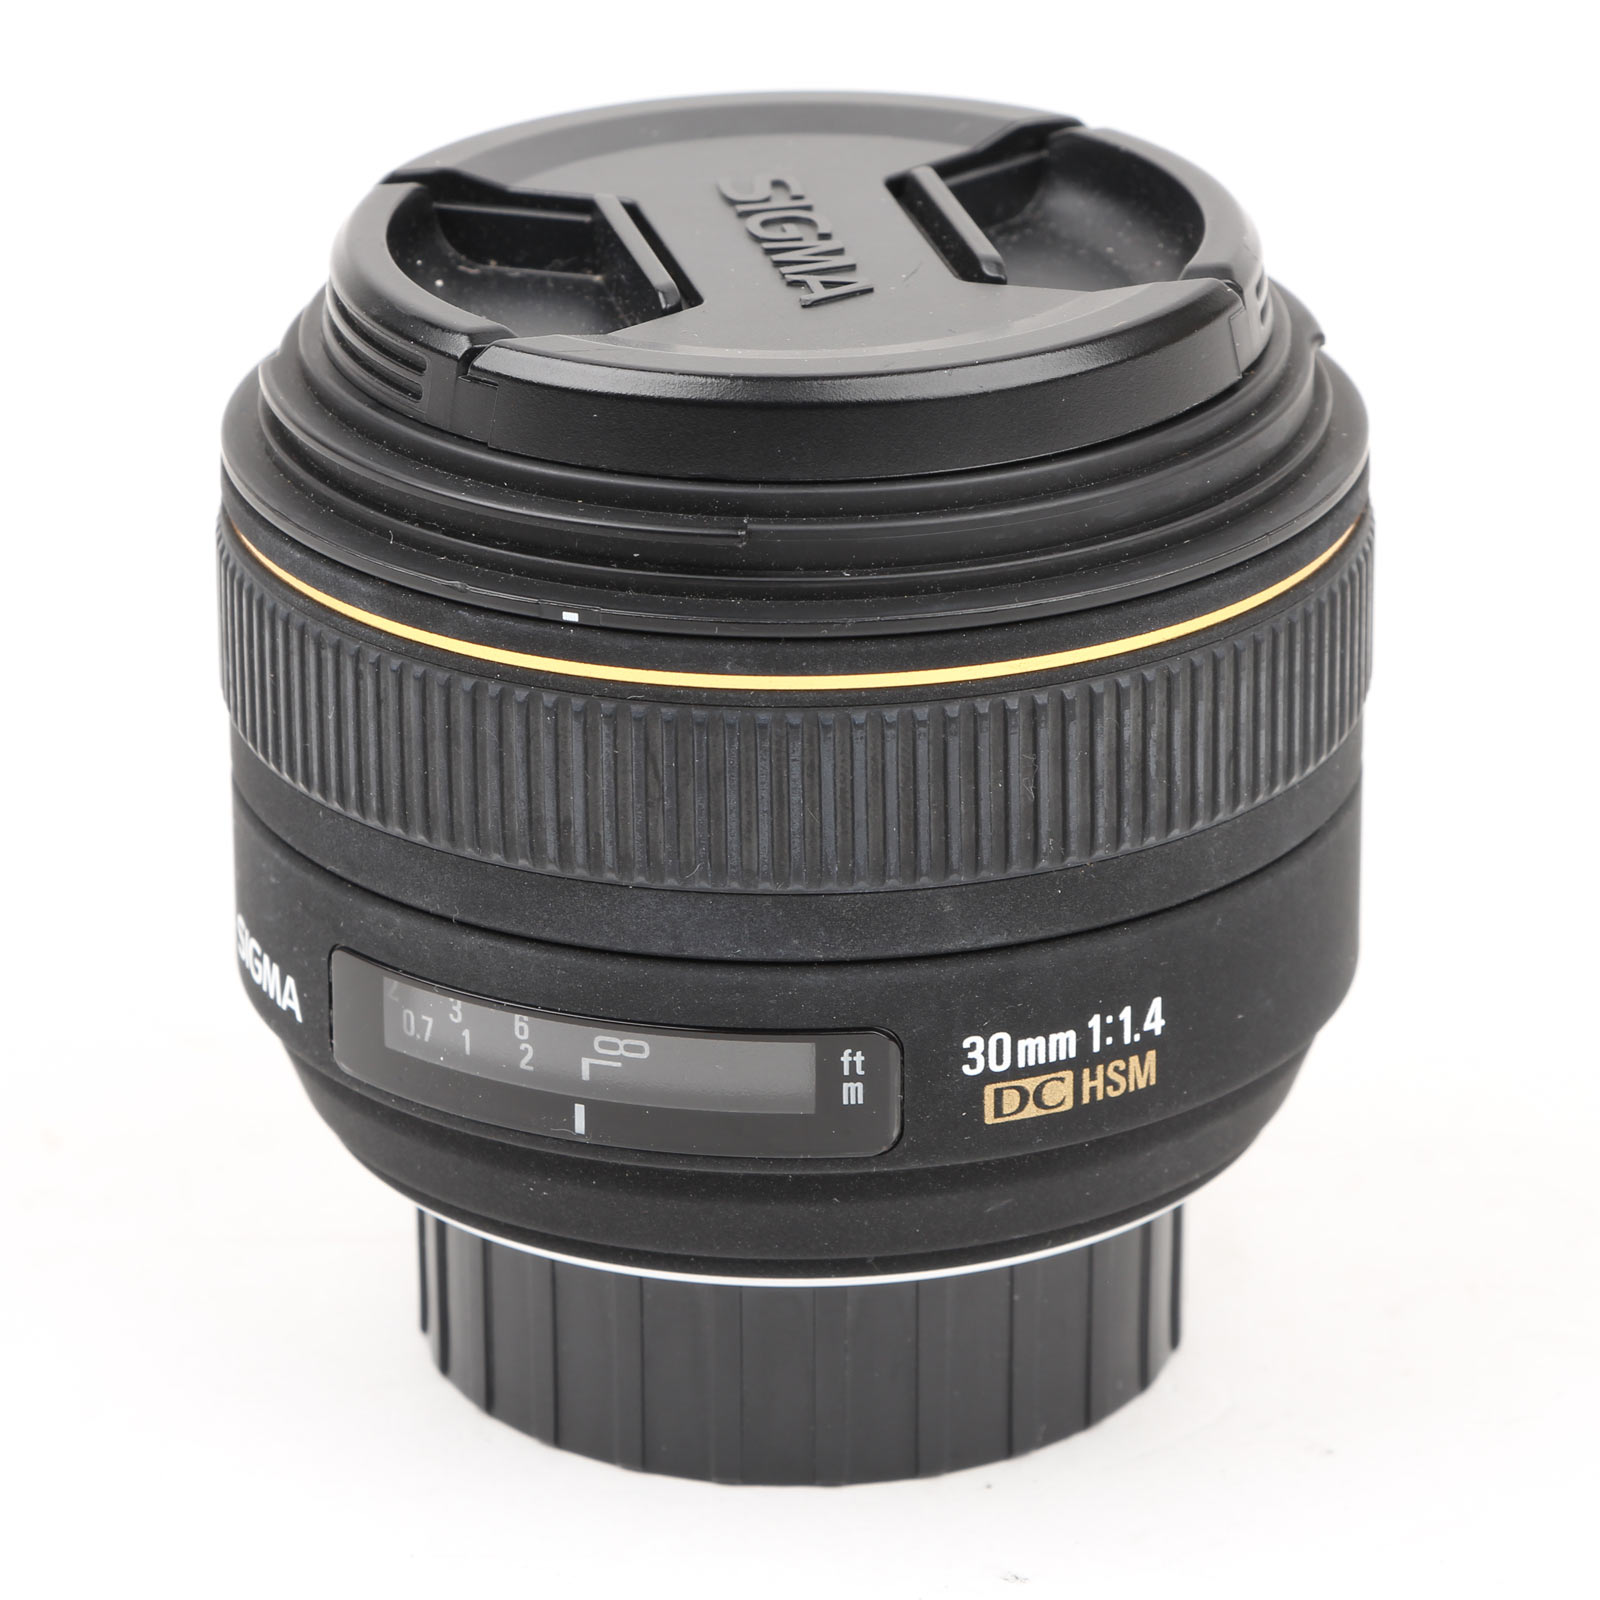 Used Sigma 30mm f1.4 EX DC HSM Lens - Nikon Fit | Wex Photo Video